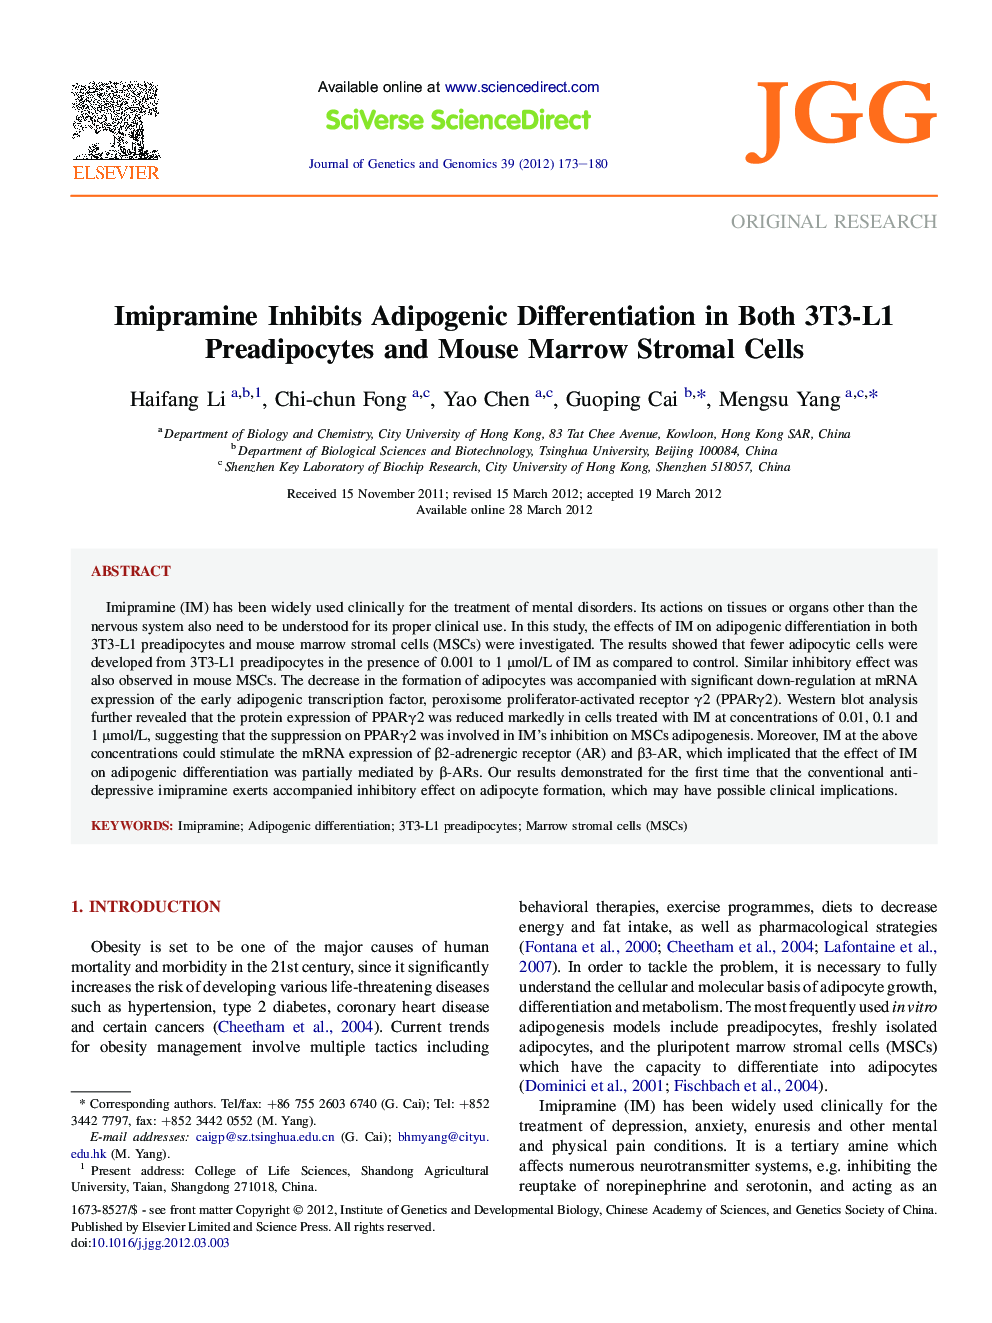 Imipramine Inhibits Adipogenic Differentiation in Both 3T3-L1 Preadipocytes and Mouse Marrow Stromal Cells